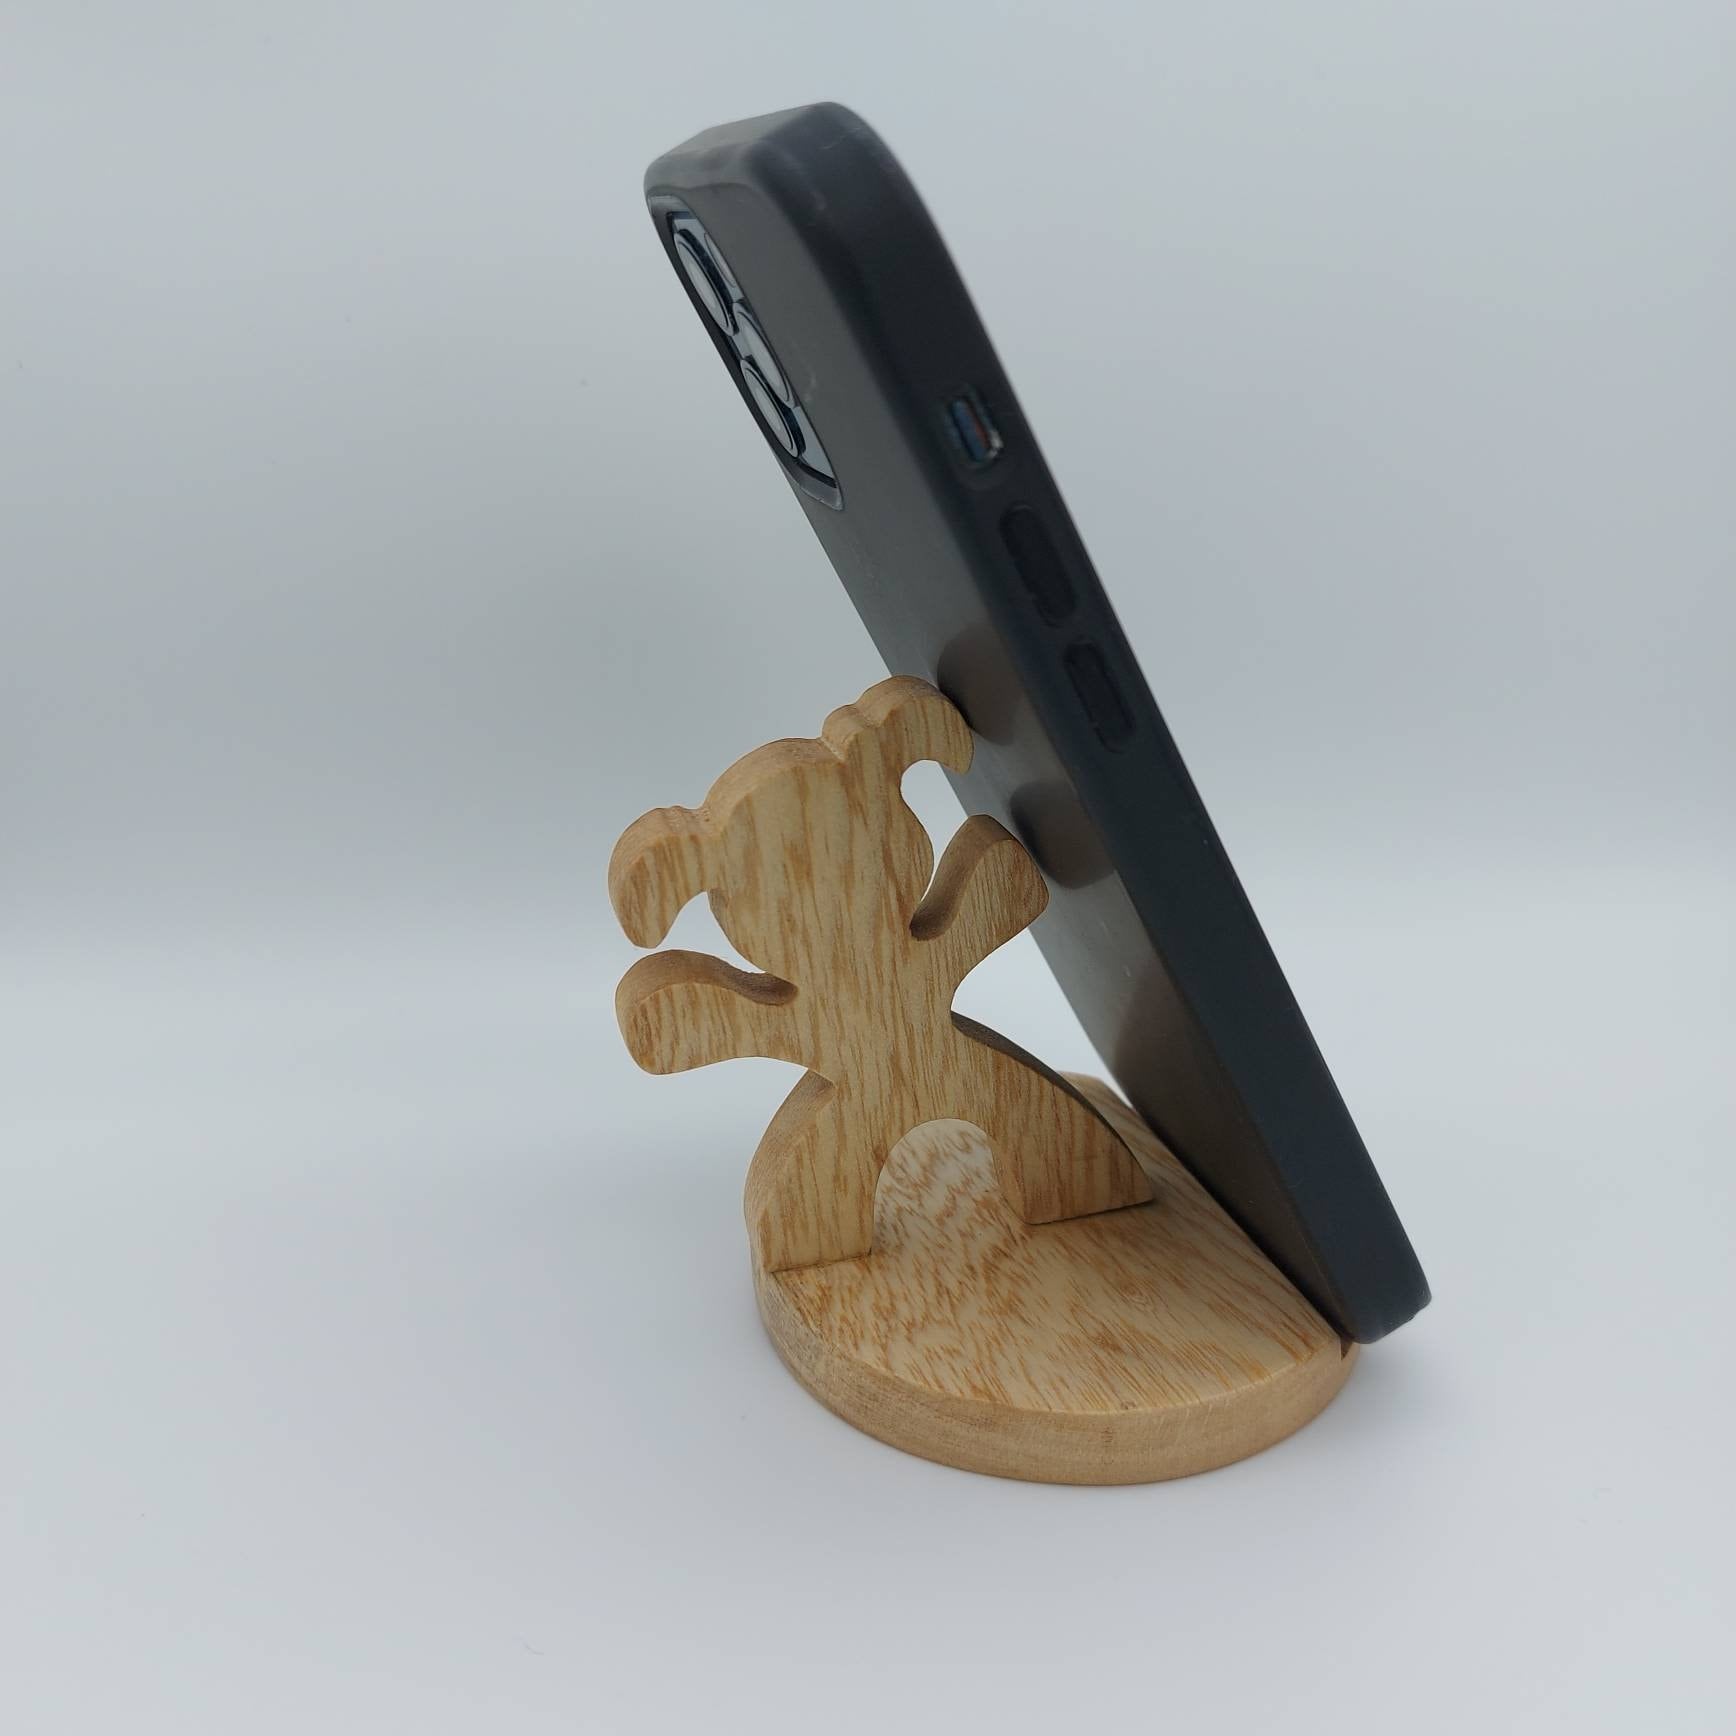 Wooden Mobile Phone Stand - Girls martial arts – The Wooden Tie